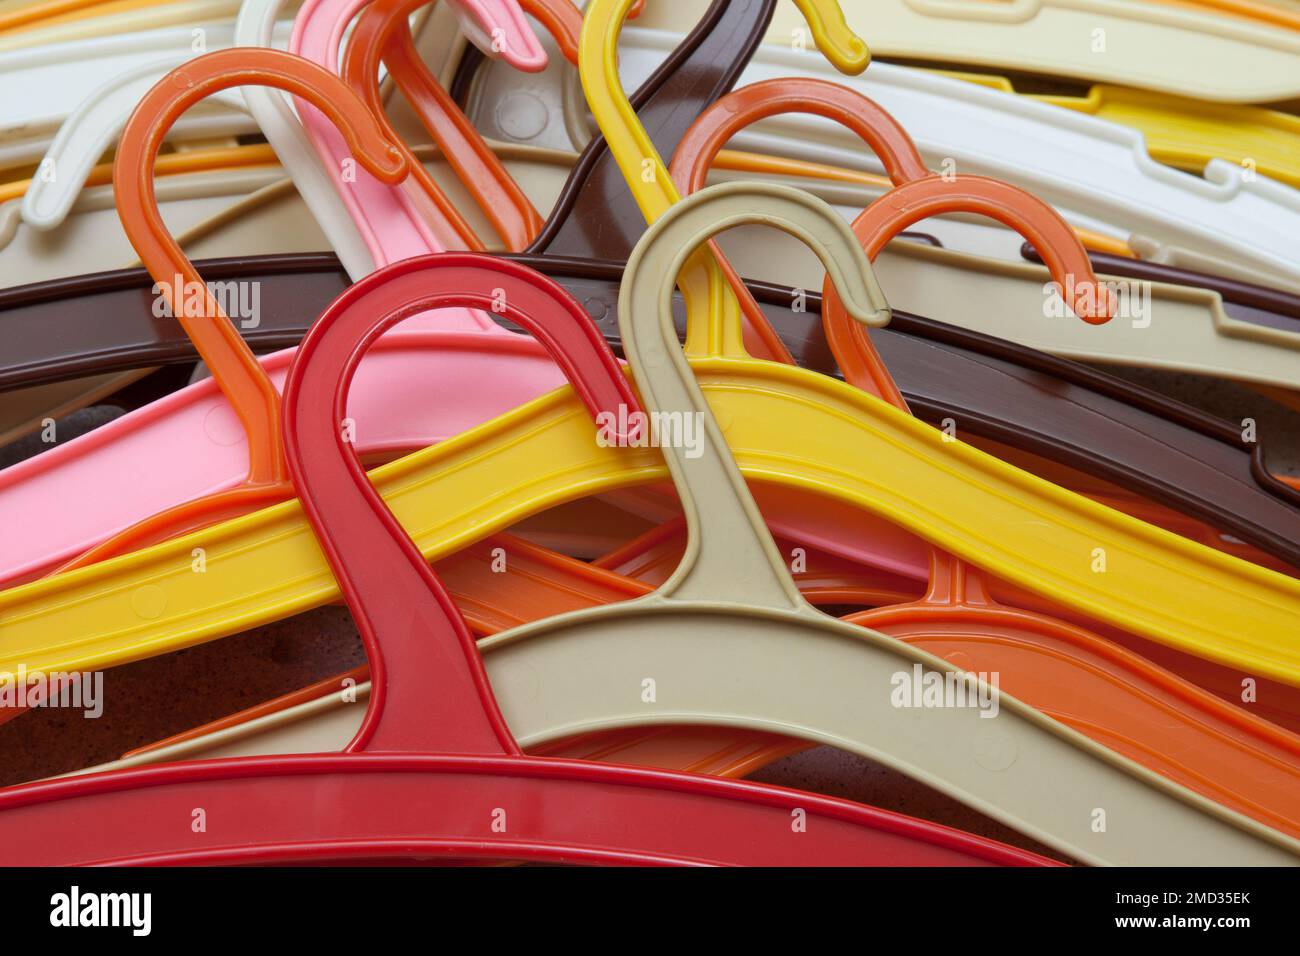 Colorful mess. A pile of colored plastic hangers. Stock Photo